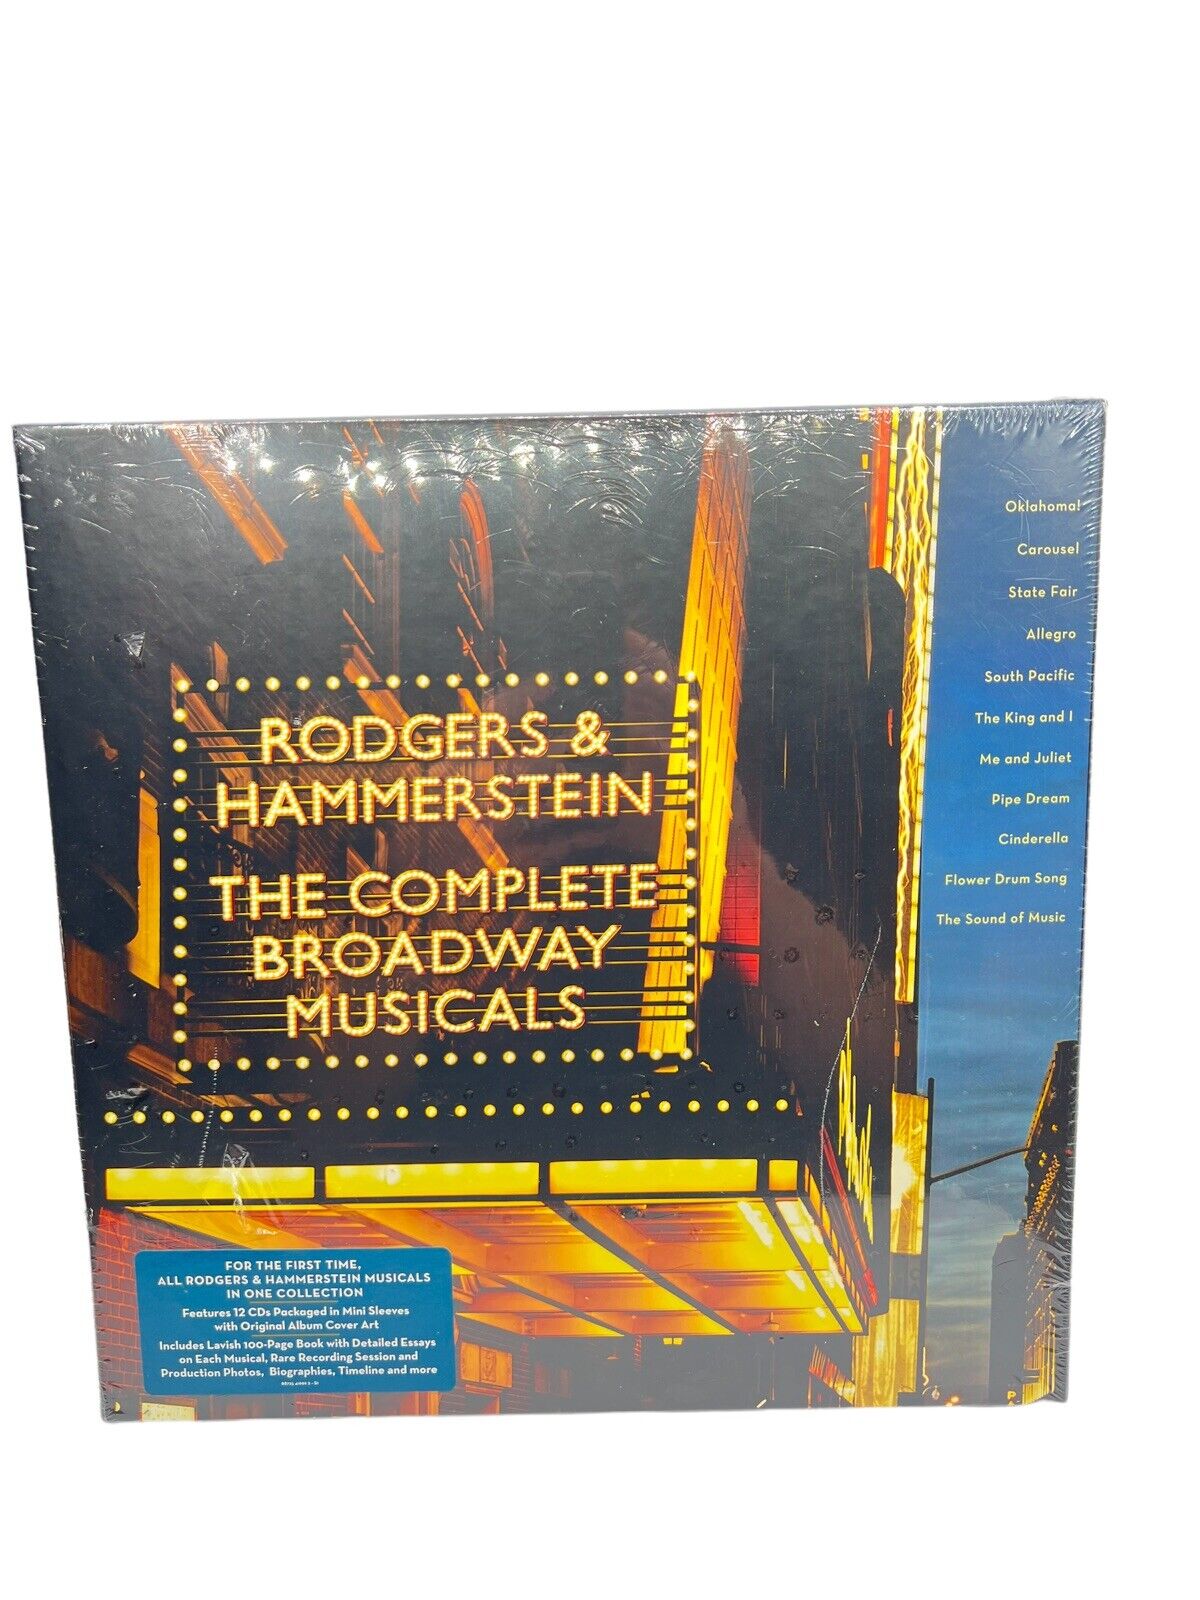 RODGERS AND HAMMERSTEIN   COMPLETE BROADWAY MUSICALS  12 CD's + 100 PAGE BOOK  +